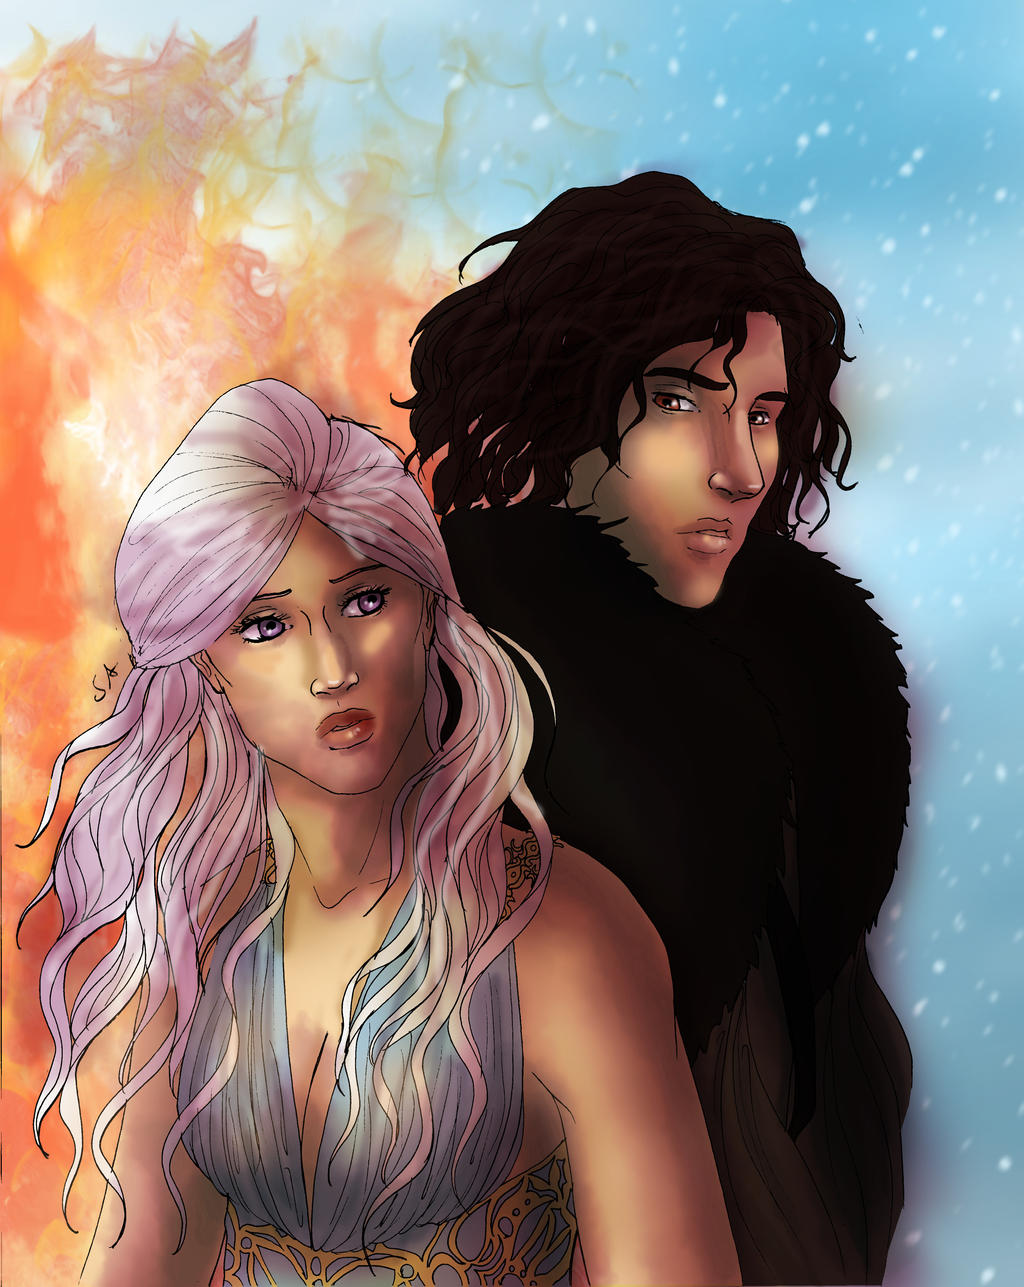 a-song-of-ice-and-fire-by-petitelilen-on-deviantart